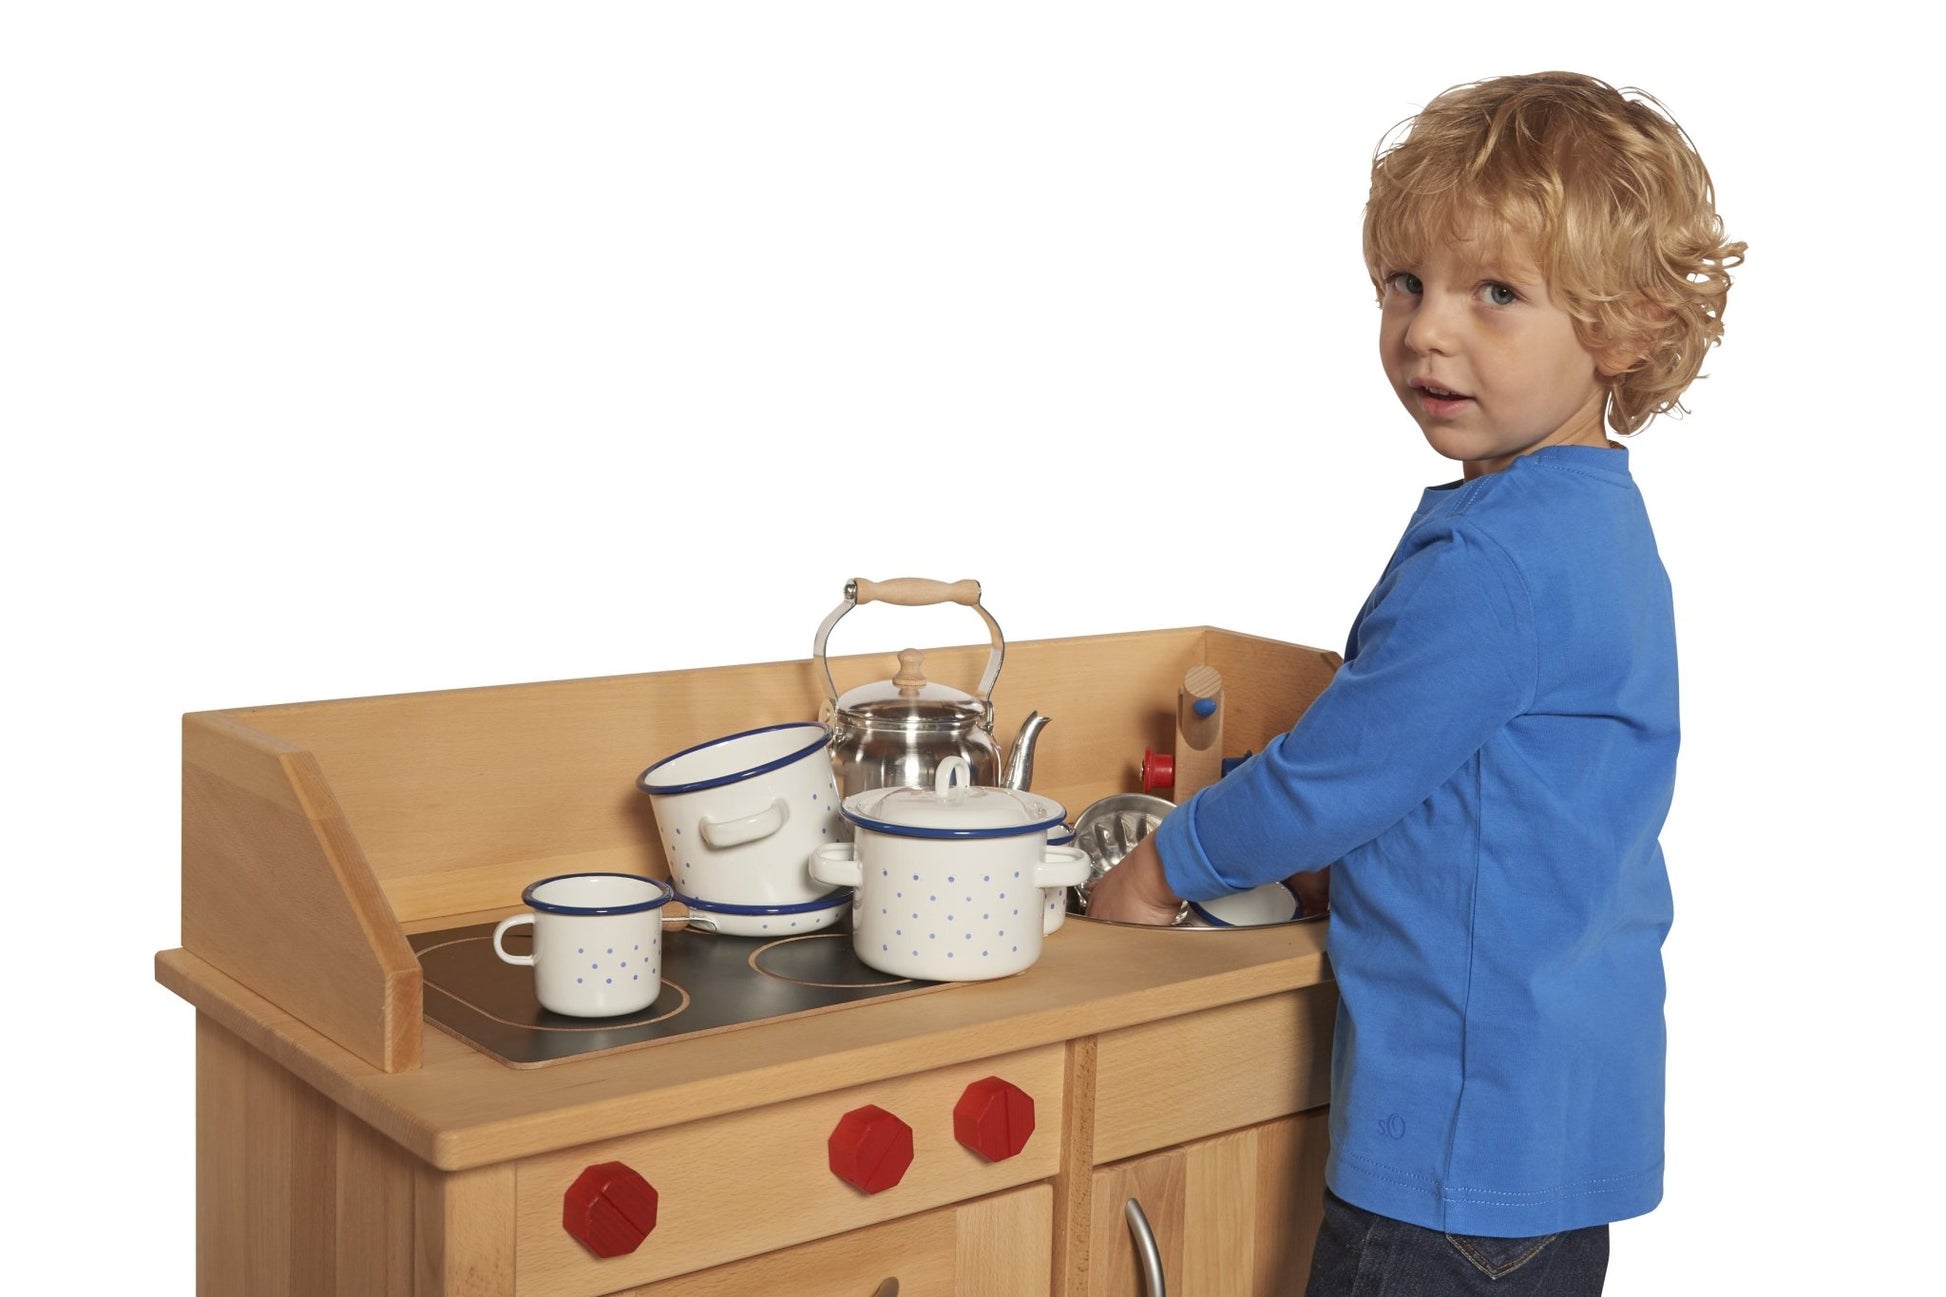 Gluckskafer Play Kitchen without Upper Structure - Wood Wood Toys Canada's Favourite Montessori Toy Store